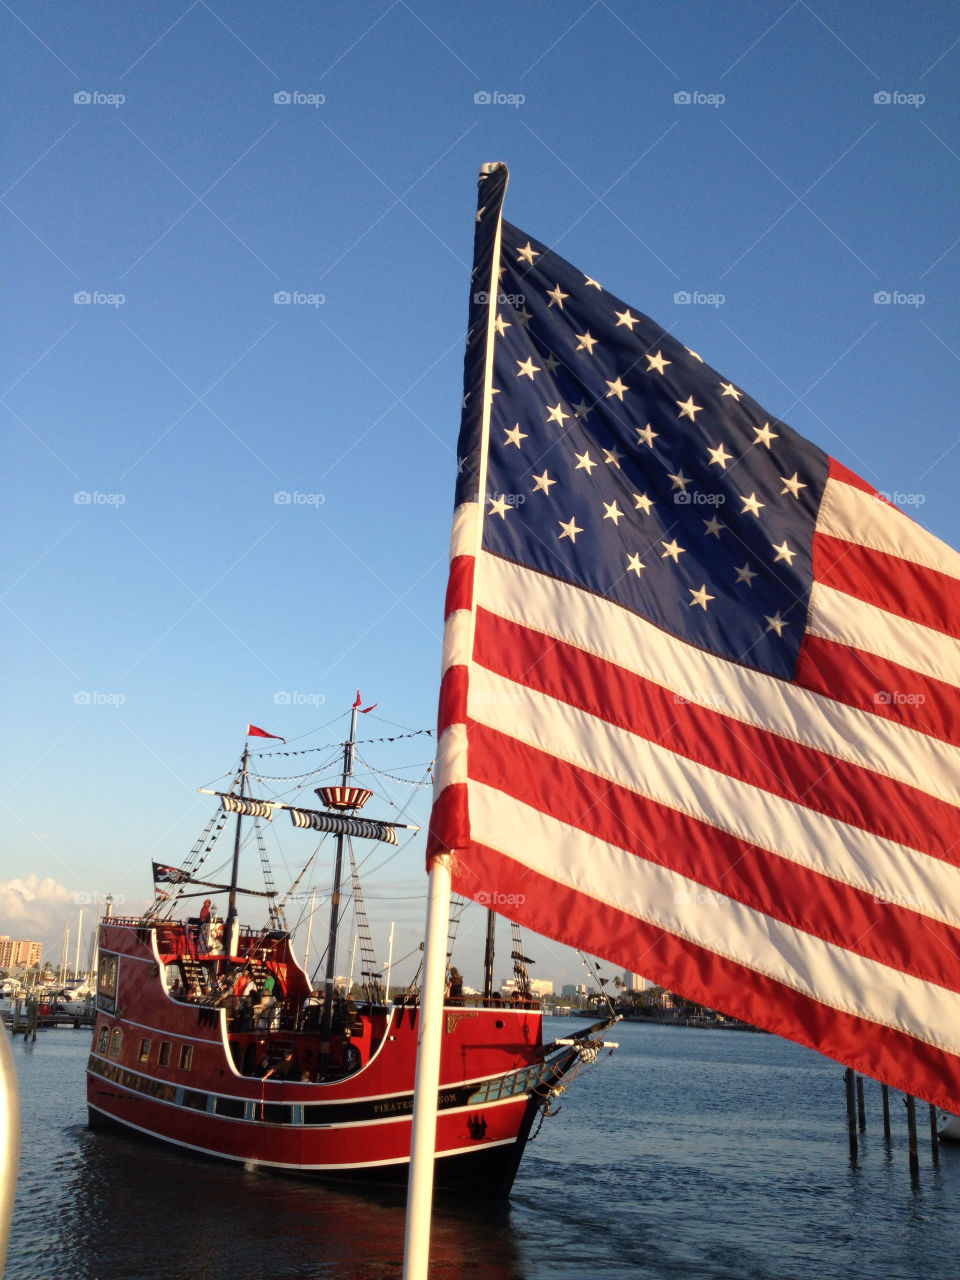 American flag and pirate ship